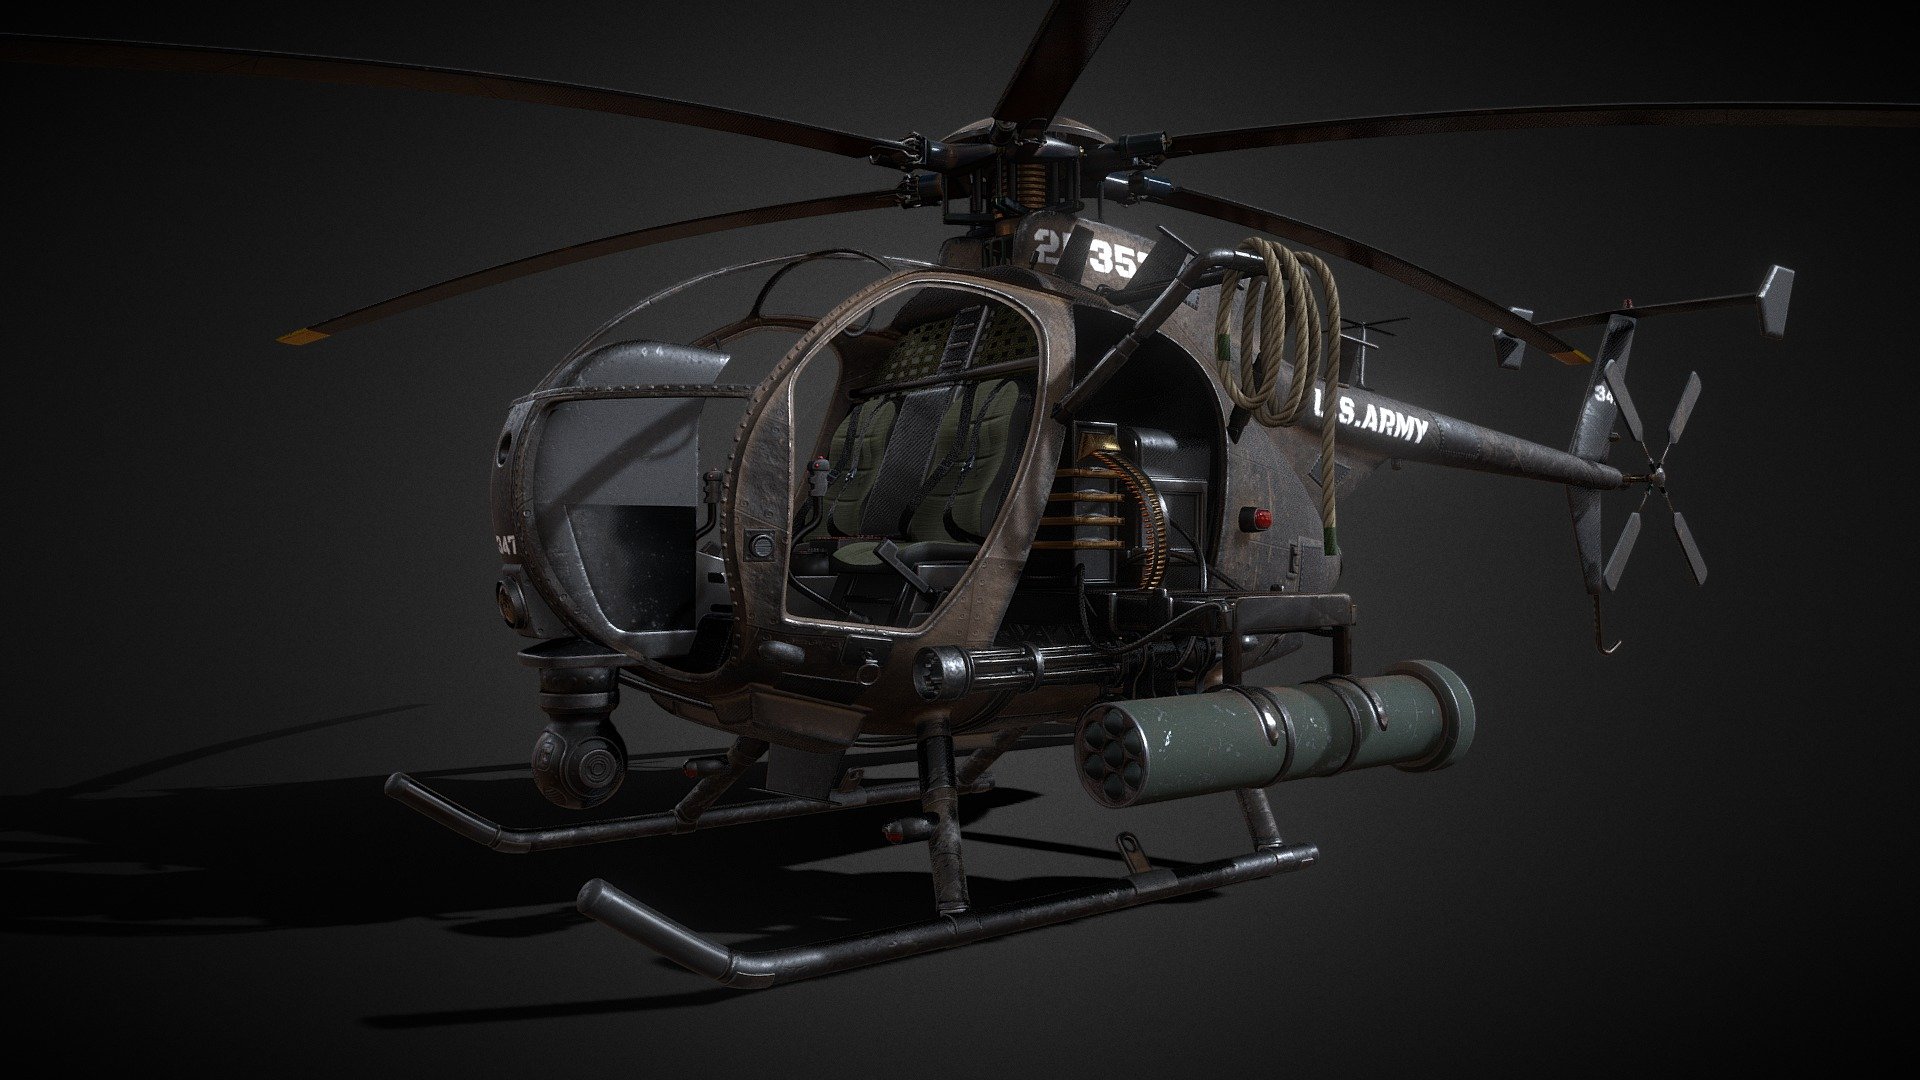 Attack Military Helicopter (MH6 Little Bird)

This model is made in blender version 3.4

No animation

PBR Texture (Metallic)

4096x4096px png/jpg textures, including Albedo, Normal, Ambient Occlusion, Metallic, Roughness and Emissive maps

Note: 
1. This model is divided into 5 different parts, which means a 4K texture for each part of the helicopter
2. In additional files you can find glass parts for this model without texture

Others:

You can also check out my newly released Survival Horror Starter Pack with 16 unique models and their variations. Check it out Here

Where to follow my art? Check this awesome page.

I will be very happy for a review or comment - Attack Military Helicopter (MH6 Little Bird) - Buy Royalty Free 3D model by Jakub (@jakub.iv) 3d model